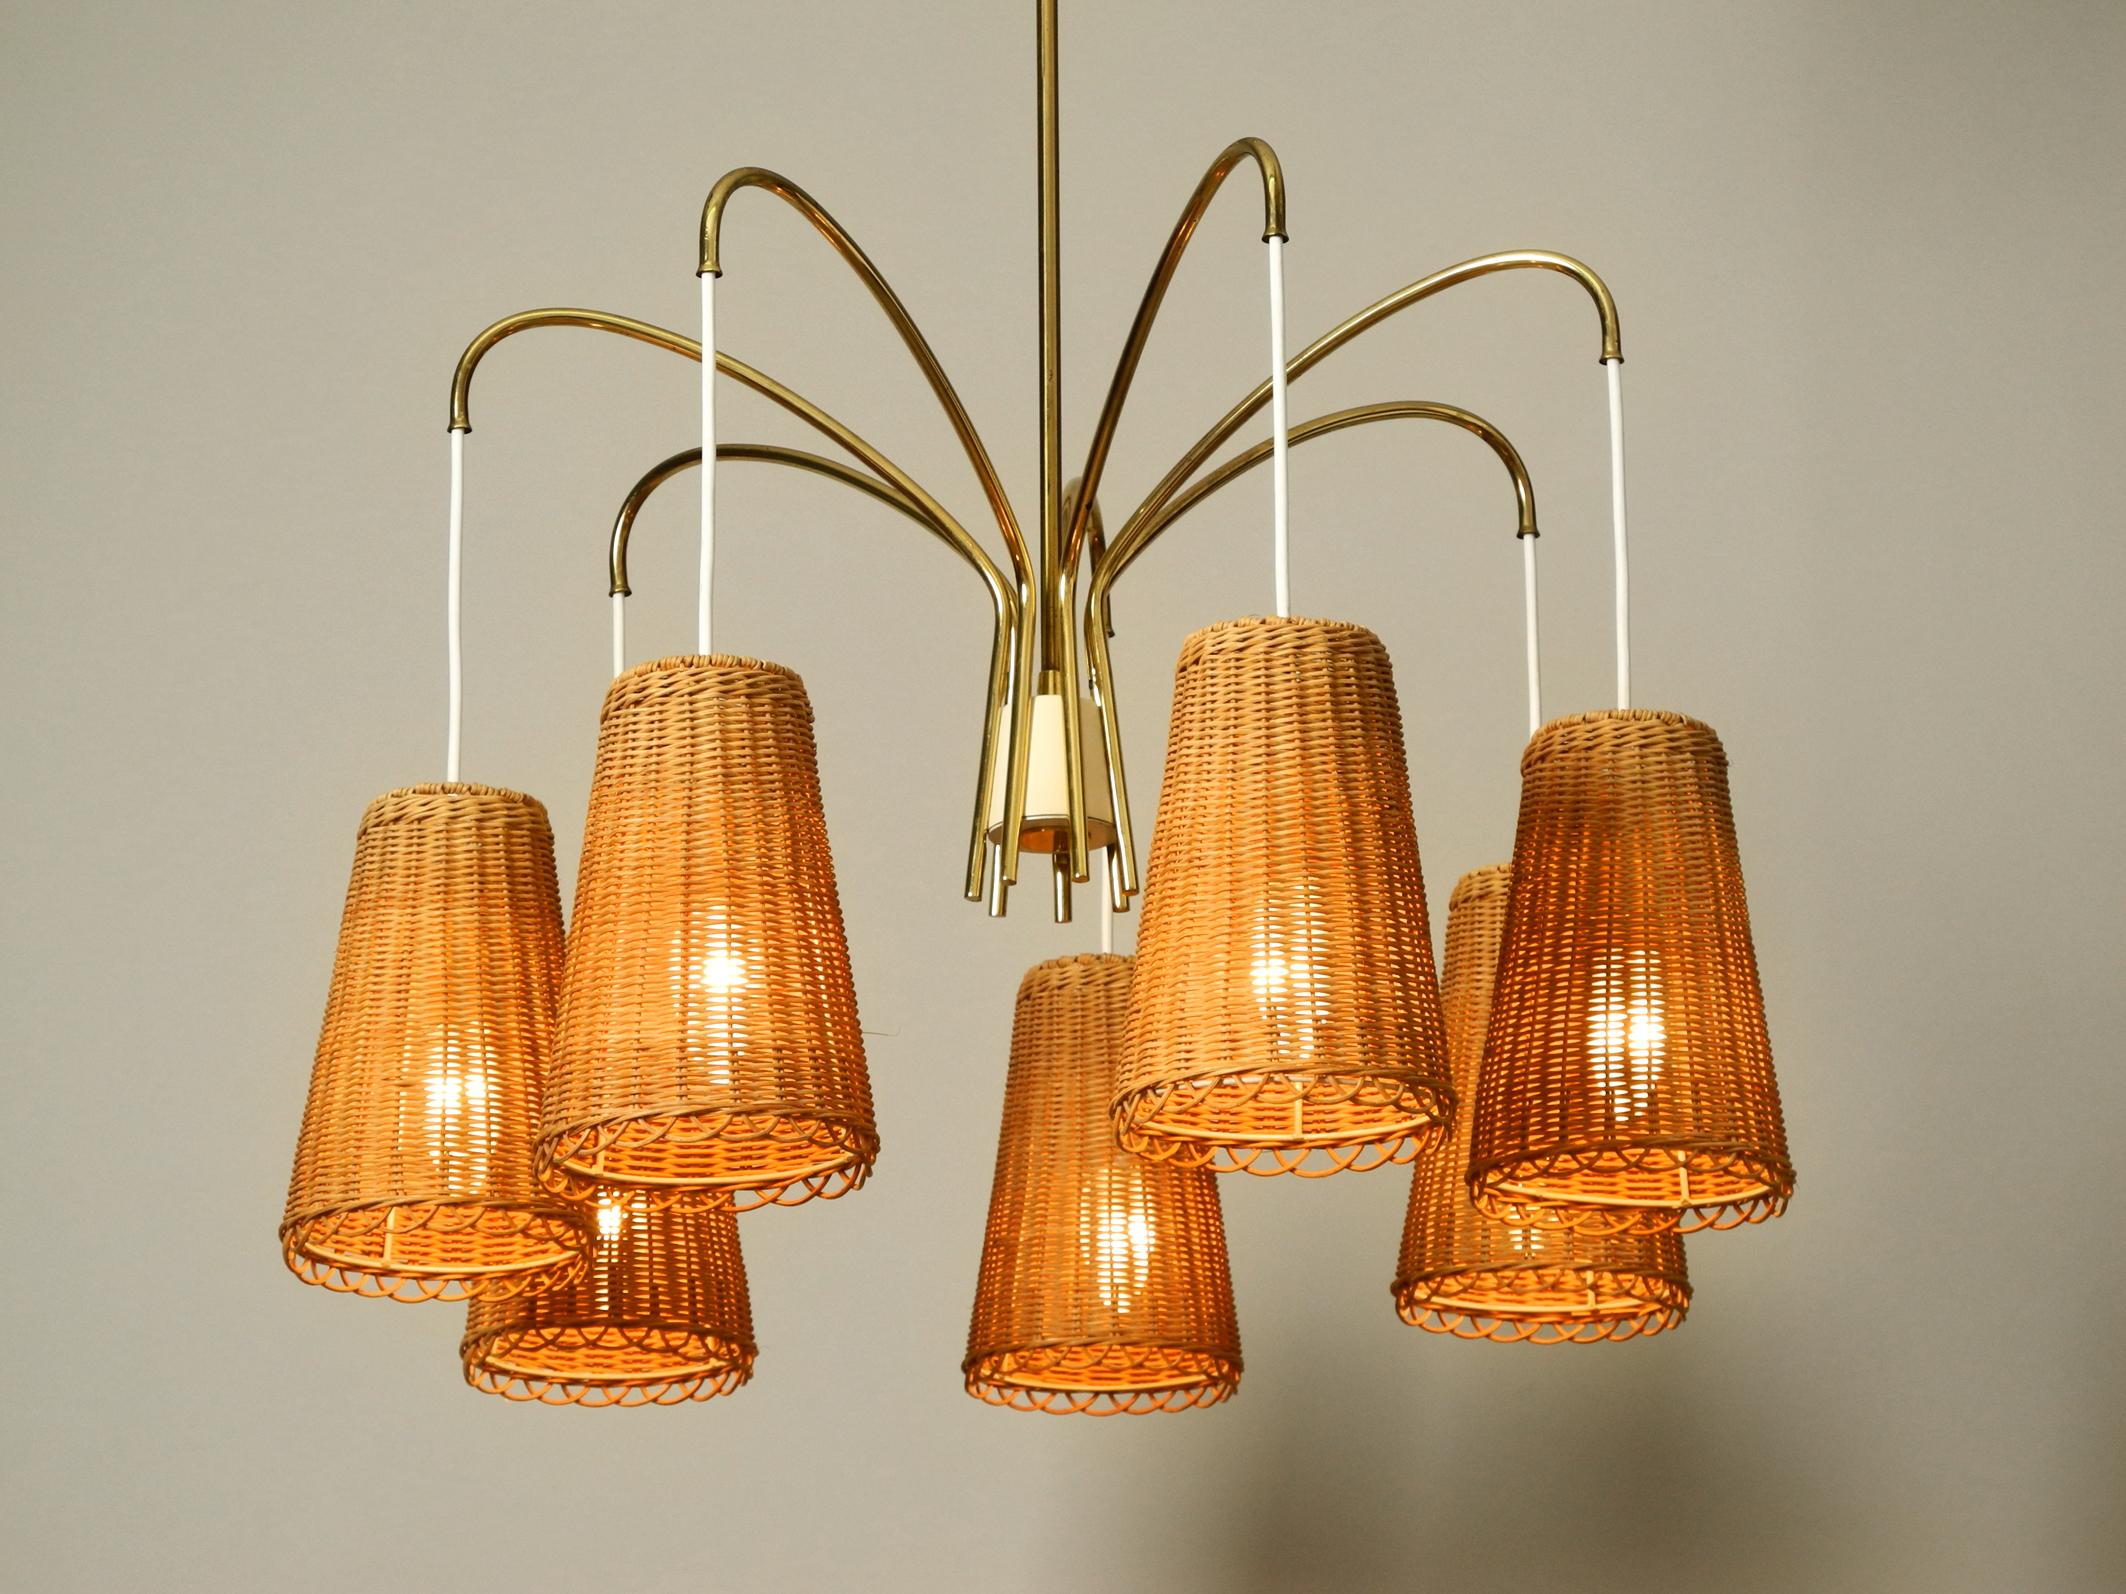 Beautiful rare midcentury brass ceiling lamp with seven basket shades.
Made by the Vereinigten Werkstätten. Made in Germany.
Very elegant Minimalist design in very good vintage condition.
Creates a very warm indirect pleasant light.
Without